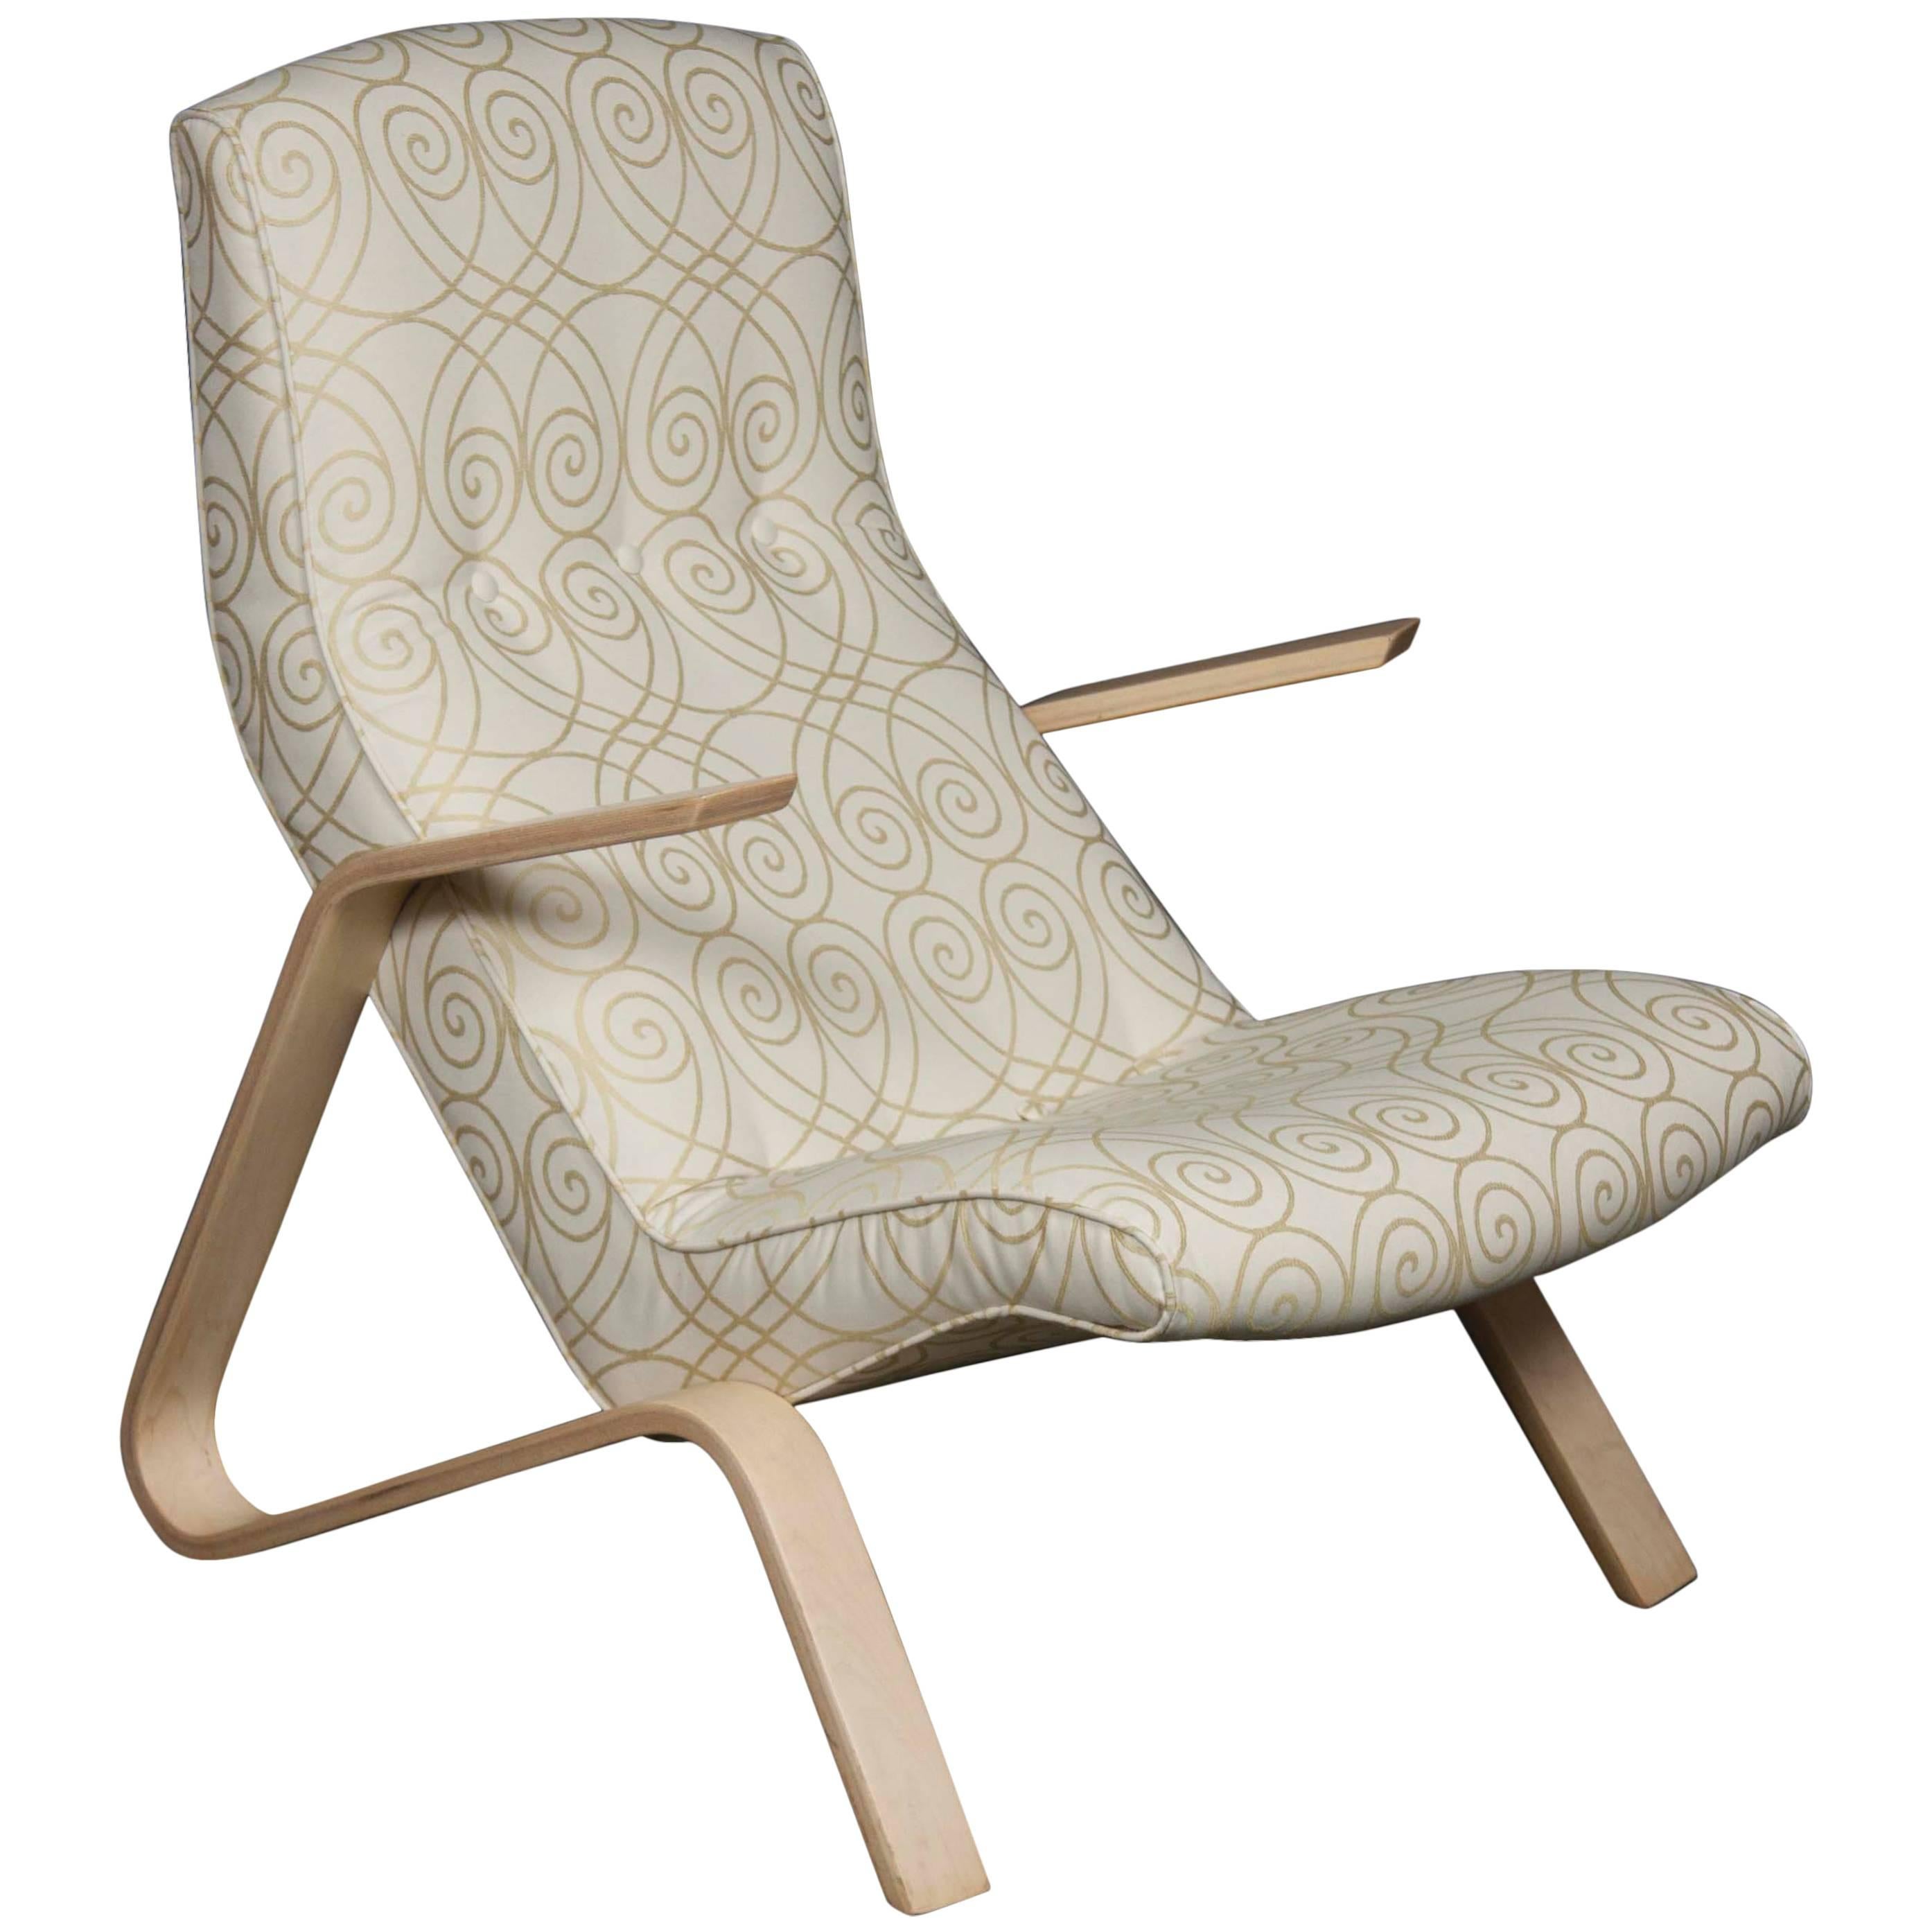 Grasshopper Chair in the Style of Eero Saarinen for Knoll For Sale